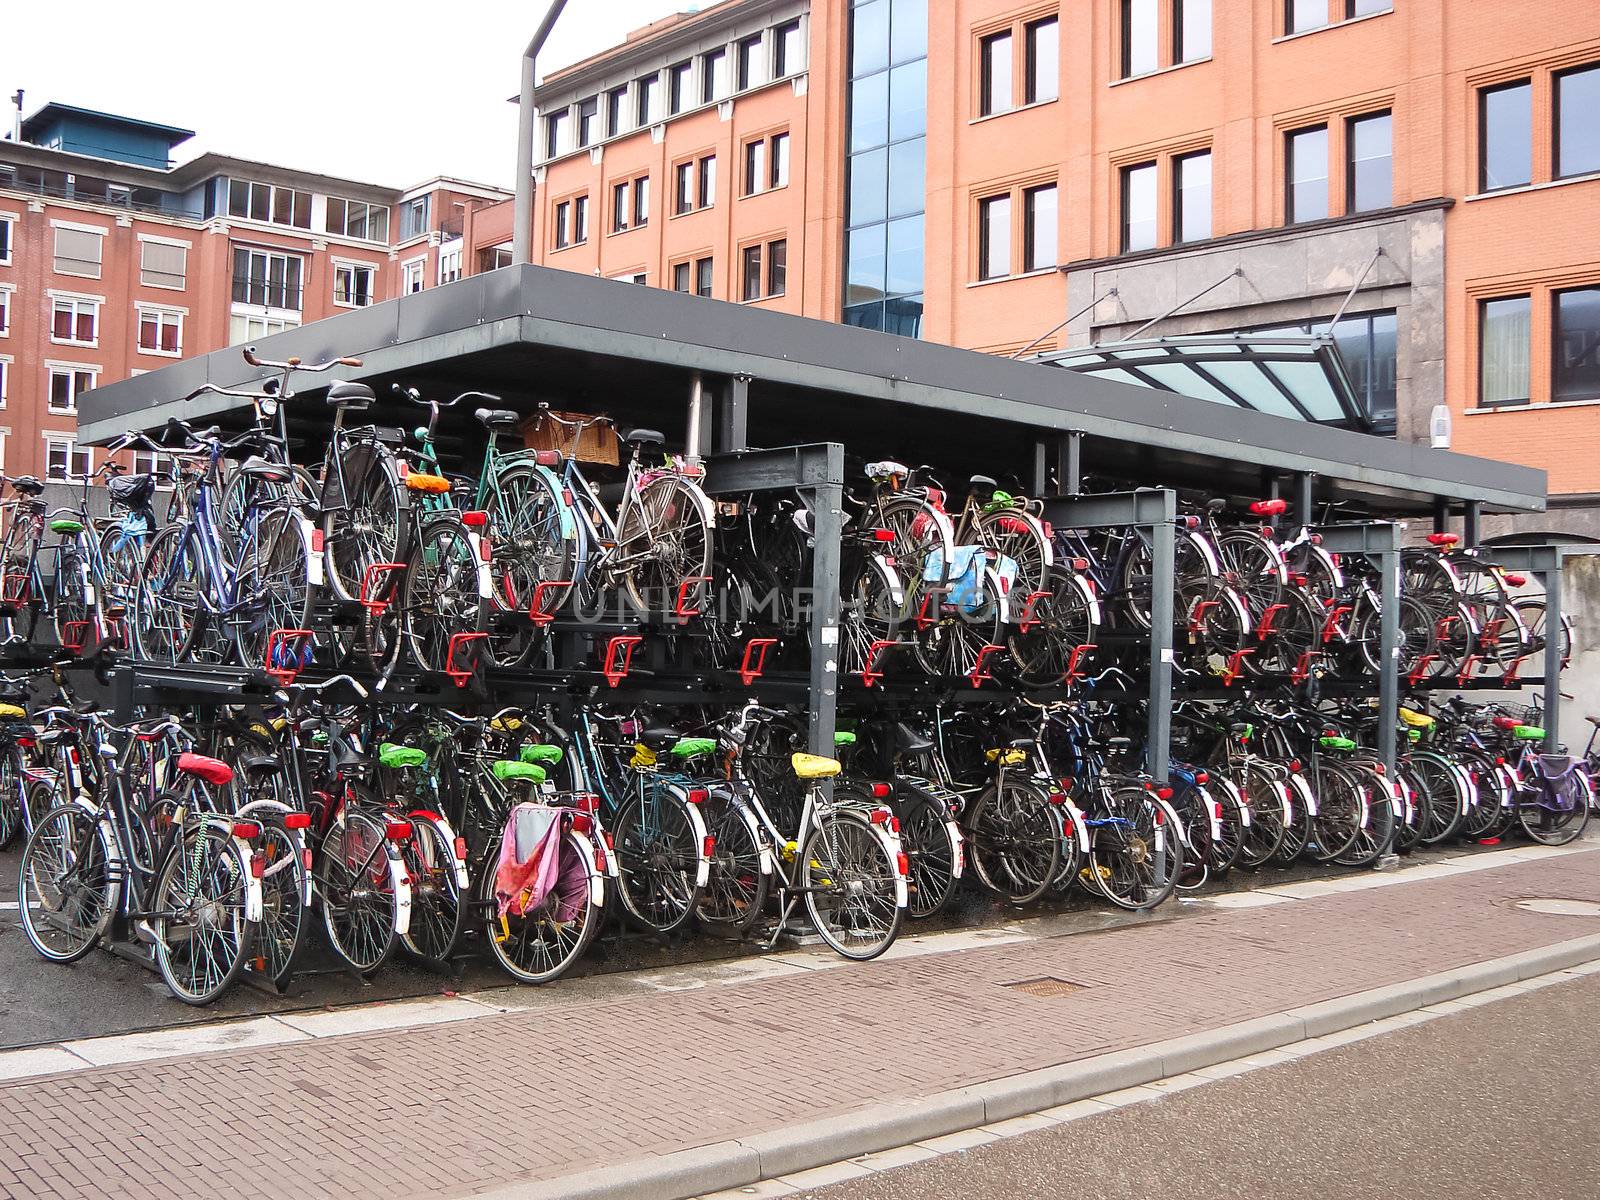 Plenty bicycles at parking lot in  by NickNick